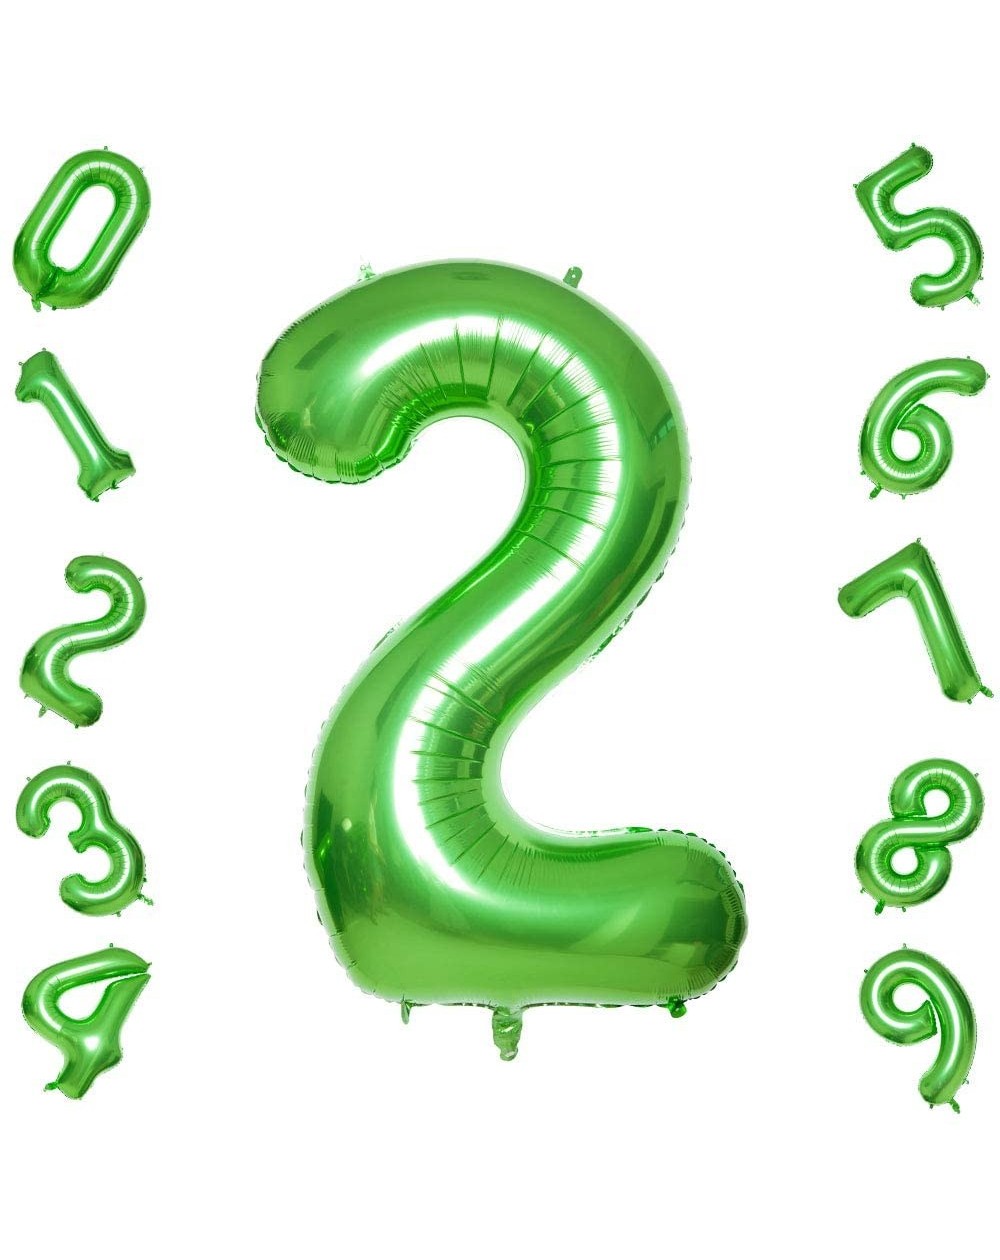 Balloons 40 Inch Green Big Number 2 Balloon Birthday Party Decorations Helium Foil Mylar Number Balloon Digital 2 - Green 2 -...